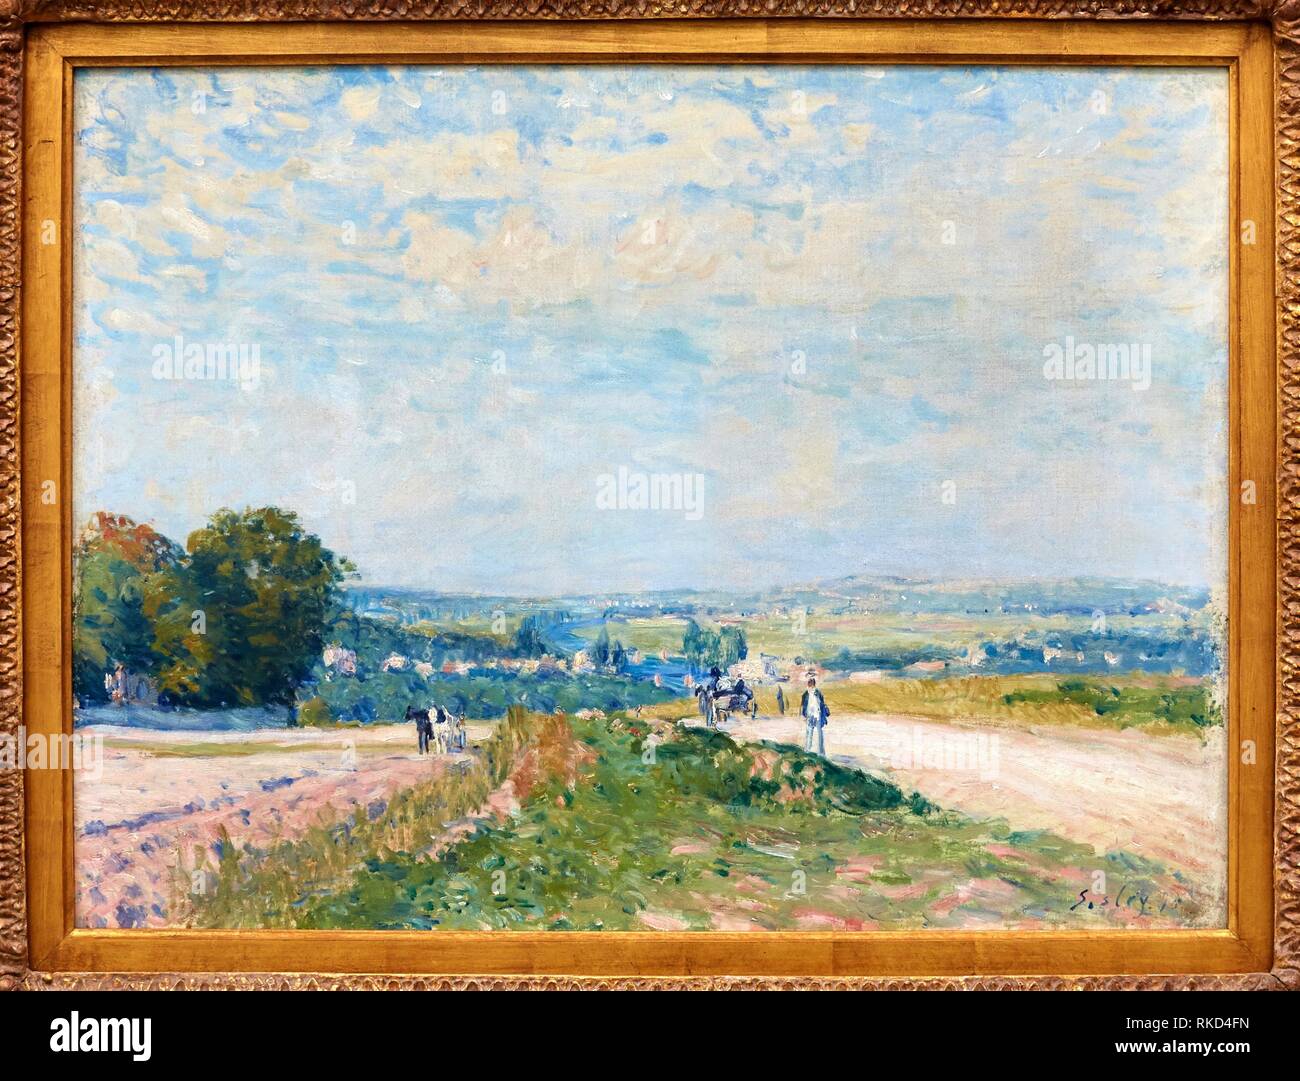 Sisley l stock and images - Alamy